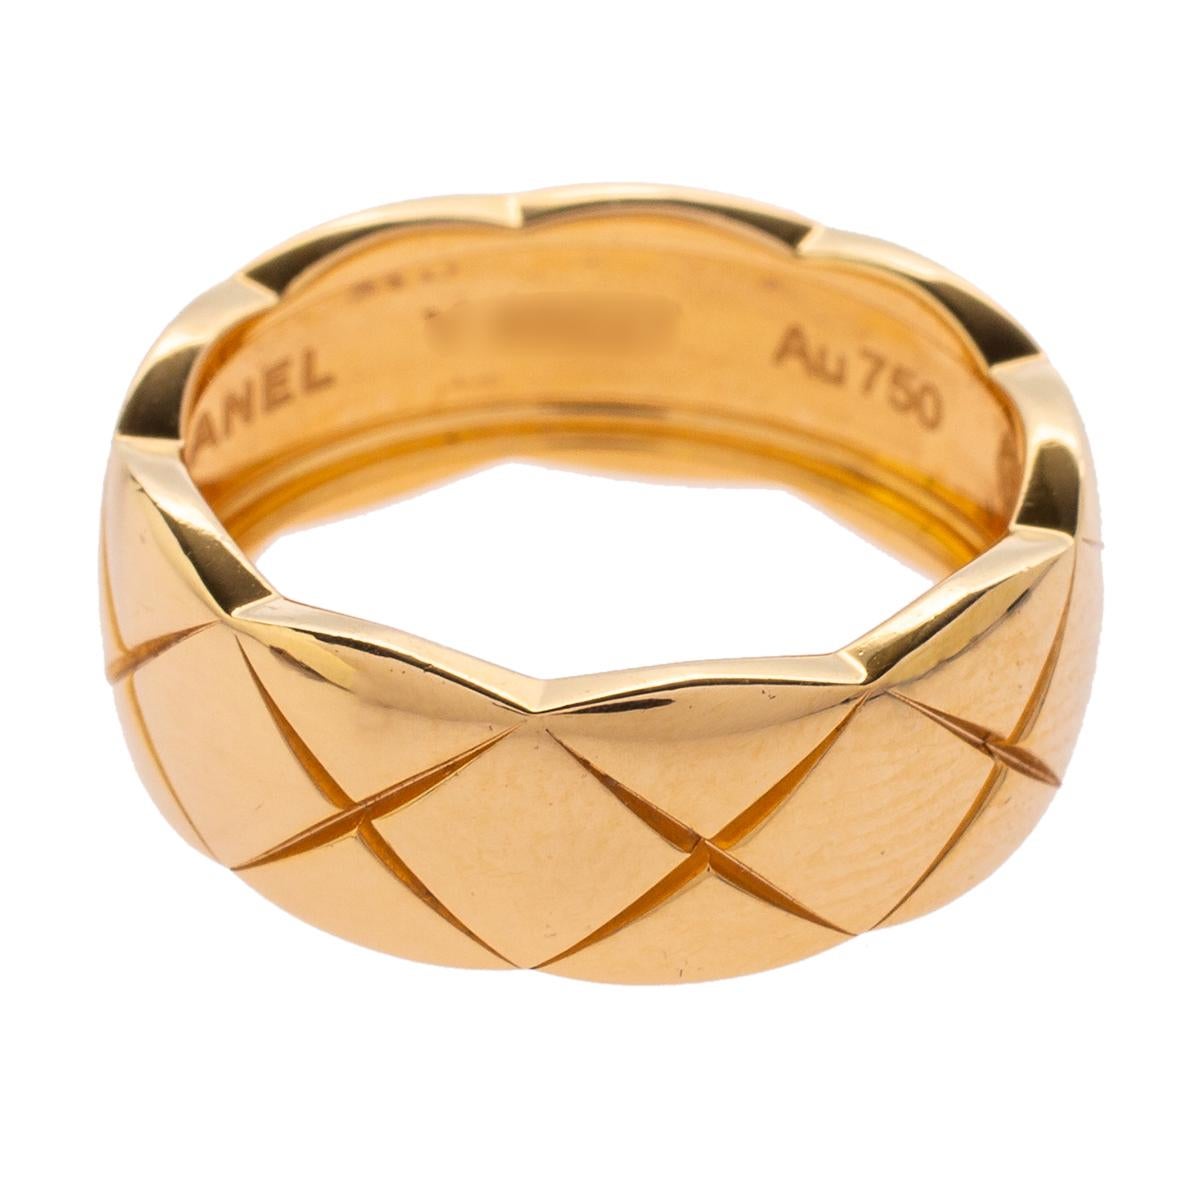 A beautiful piece of jewelry that is elegant and timeless, this Chanel Coco Crush ring can be worn with ease and stacked with pieces from the same line for a contemporary vibe. Constructed in 18k yellow gold, this ring features the iconic quilting